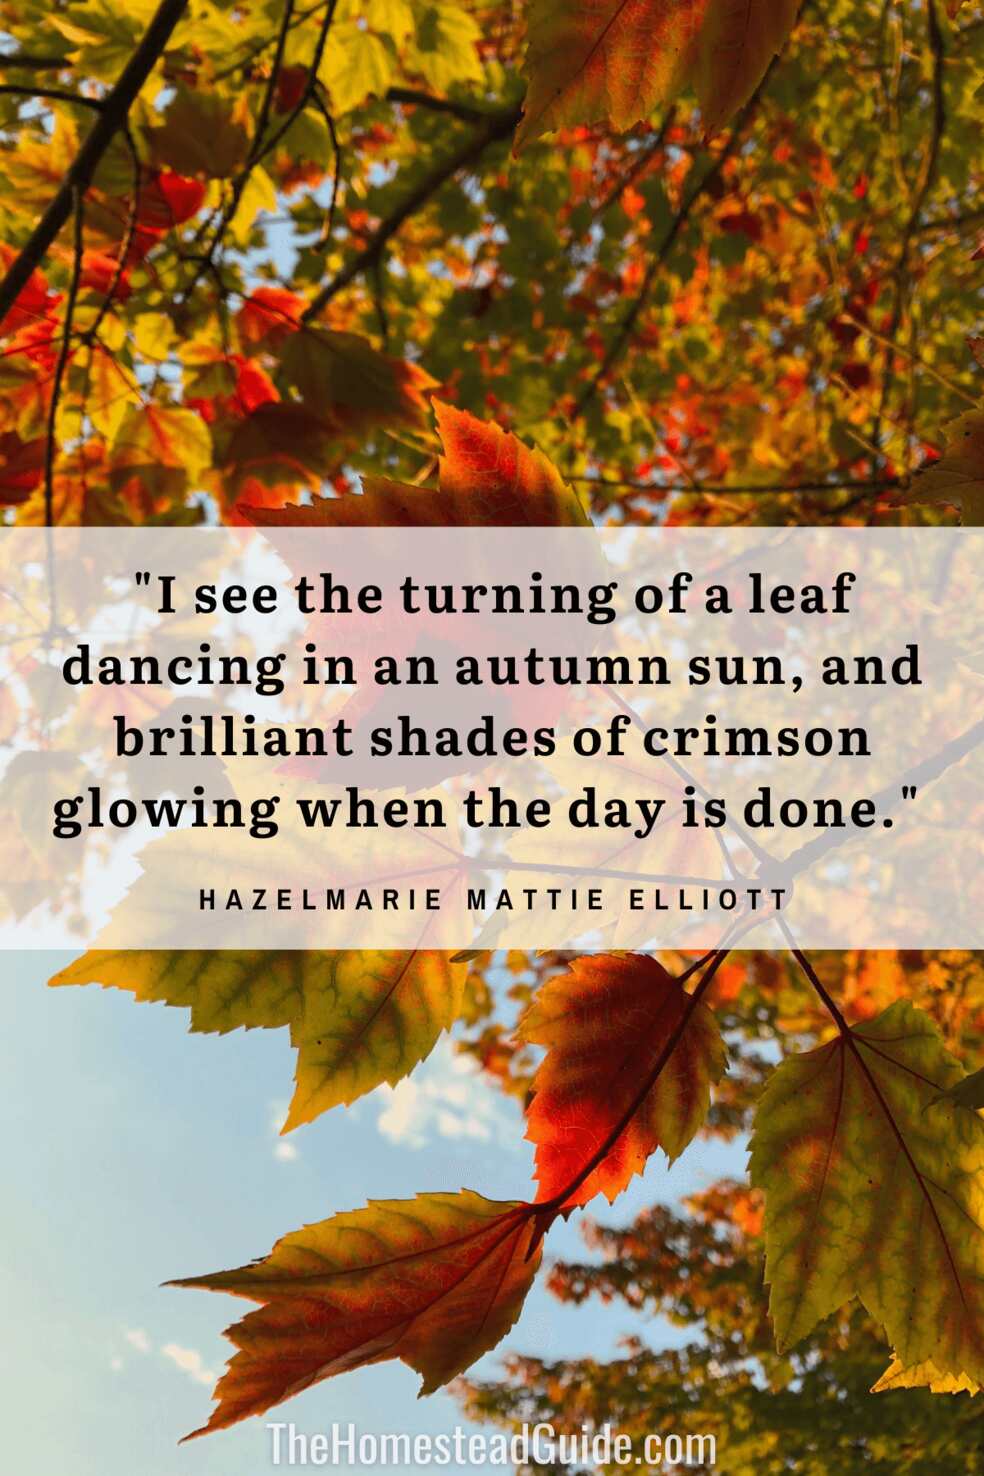 I see the turning of a leaf dancing in an autumn sun, and brilliant shades of crimson glowing when the day is done.